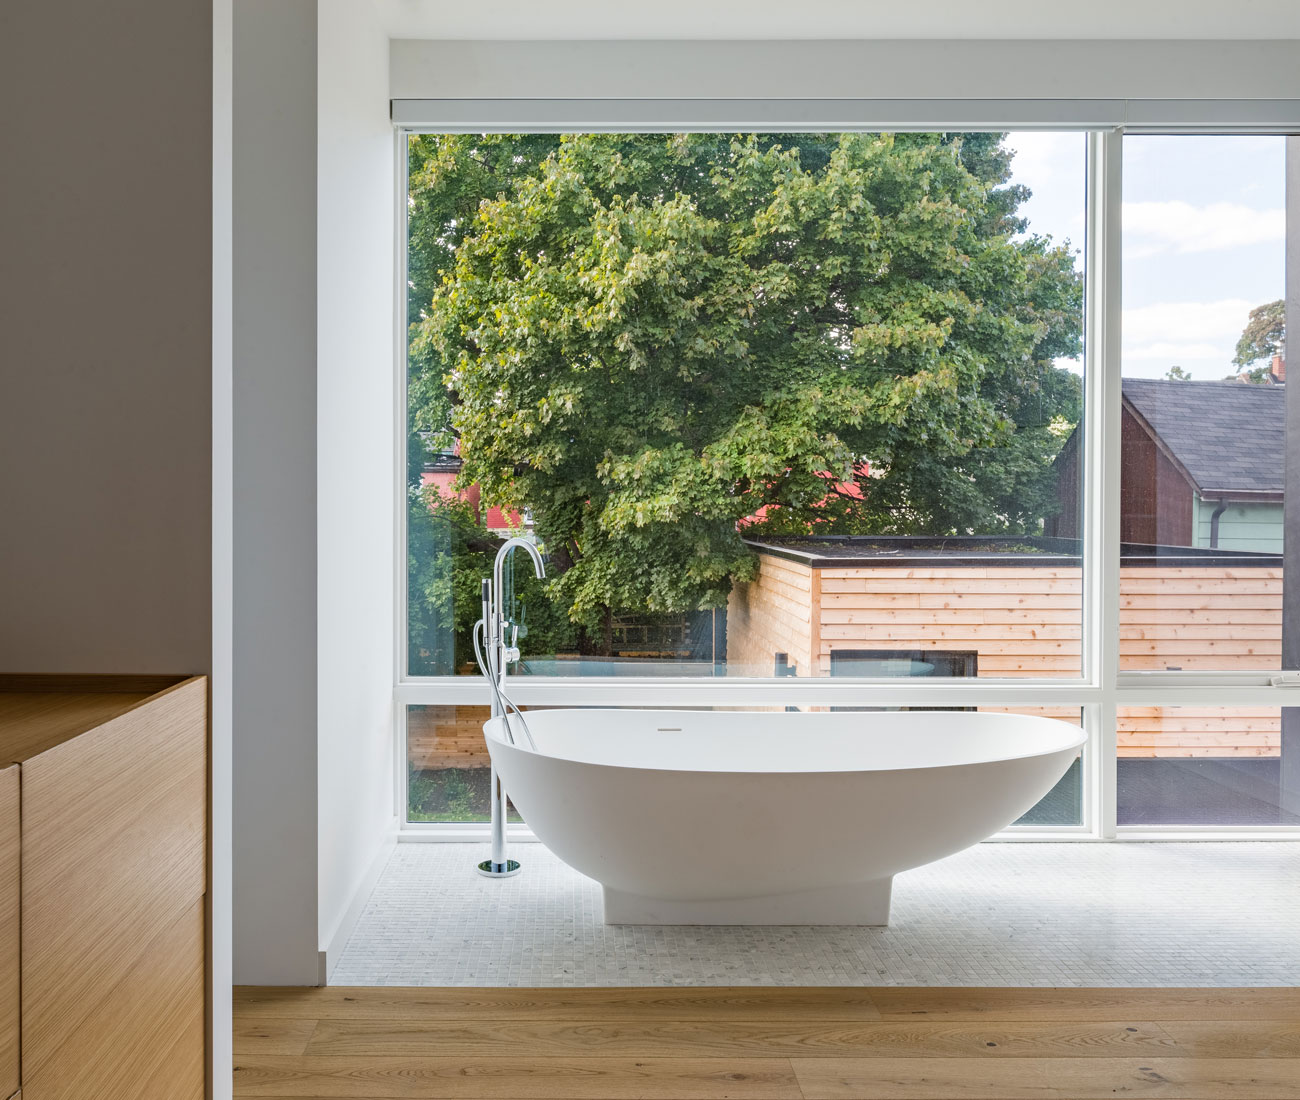 The master suite includes this bathtub, overlooking the lush yard. 